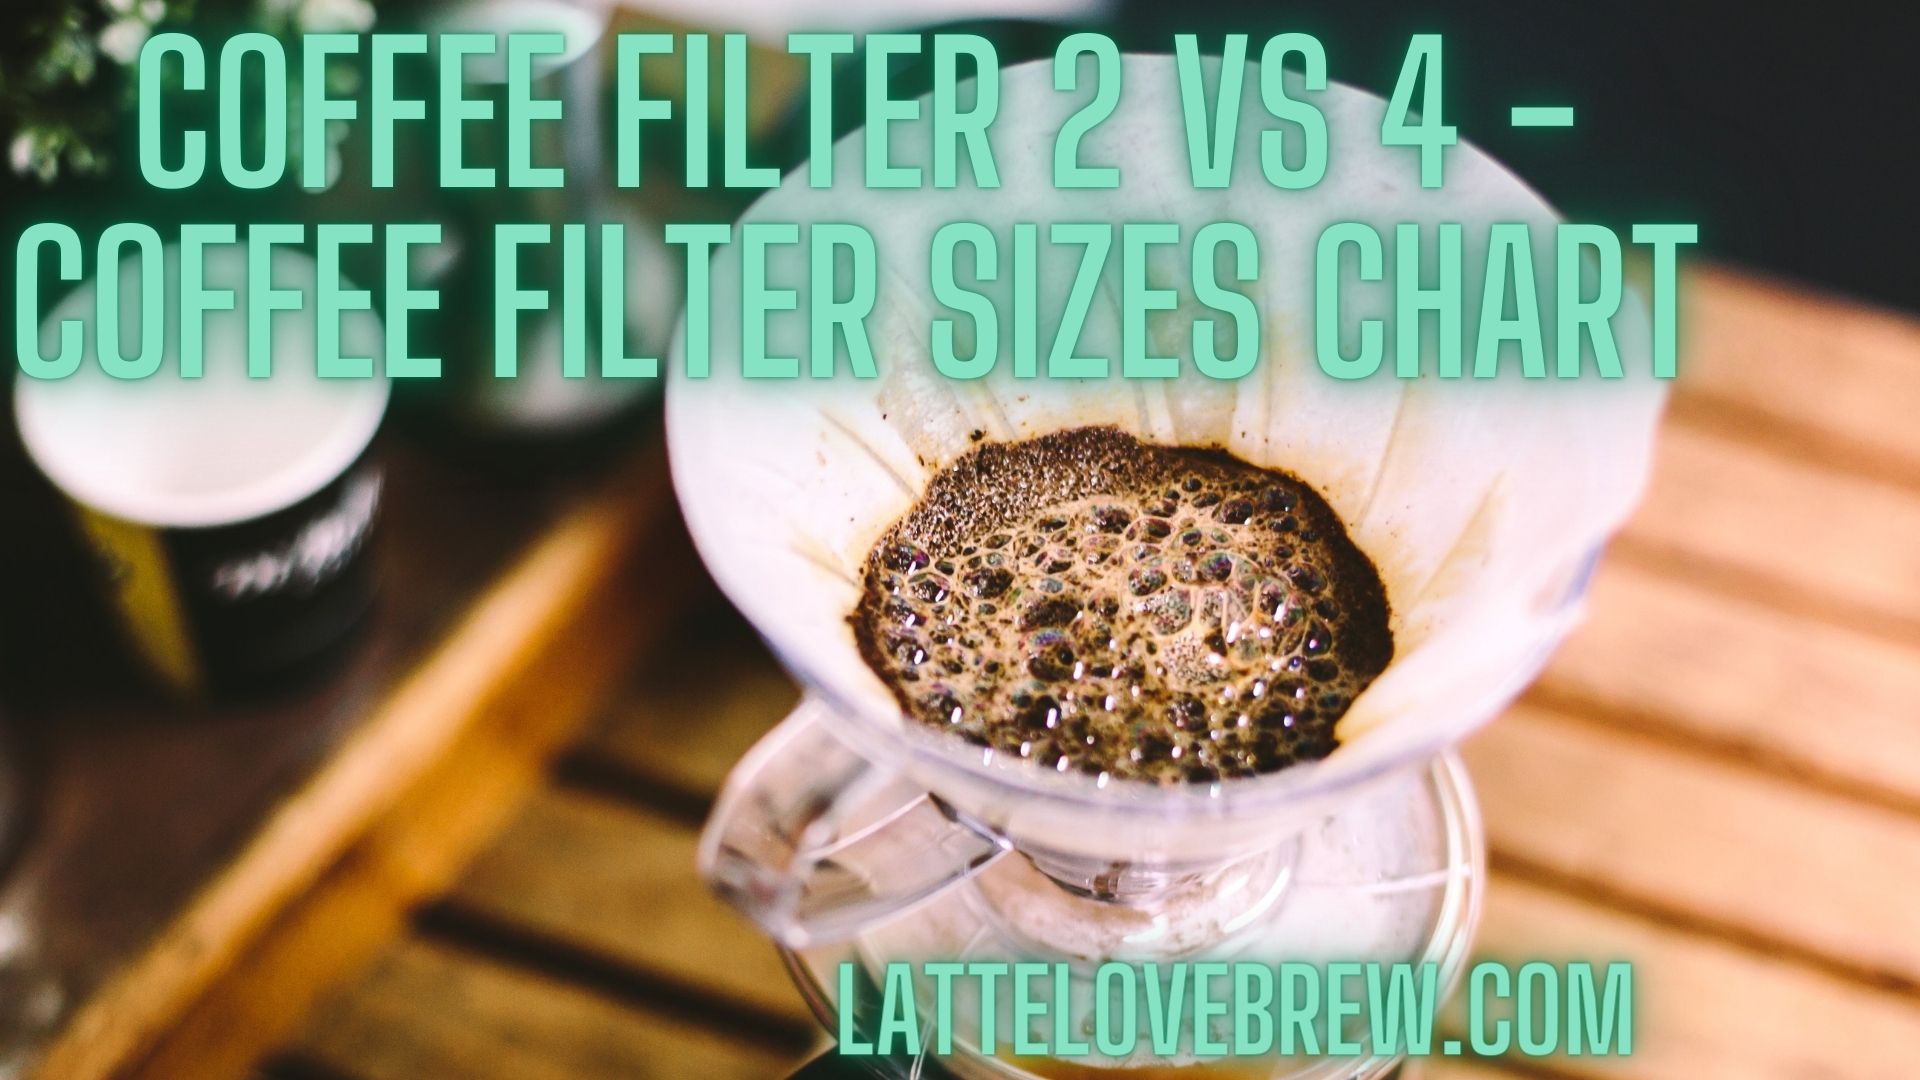 Coffee Filter 2 Vs 4 - Coffee Filter Sizes Chart - Latte Love Brew